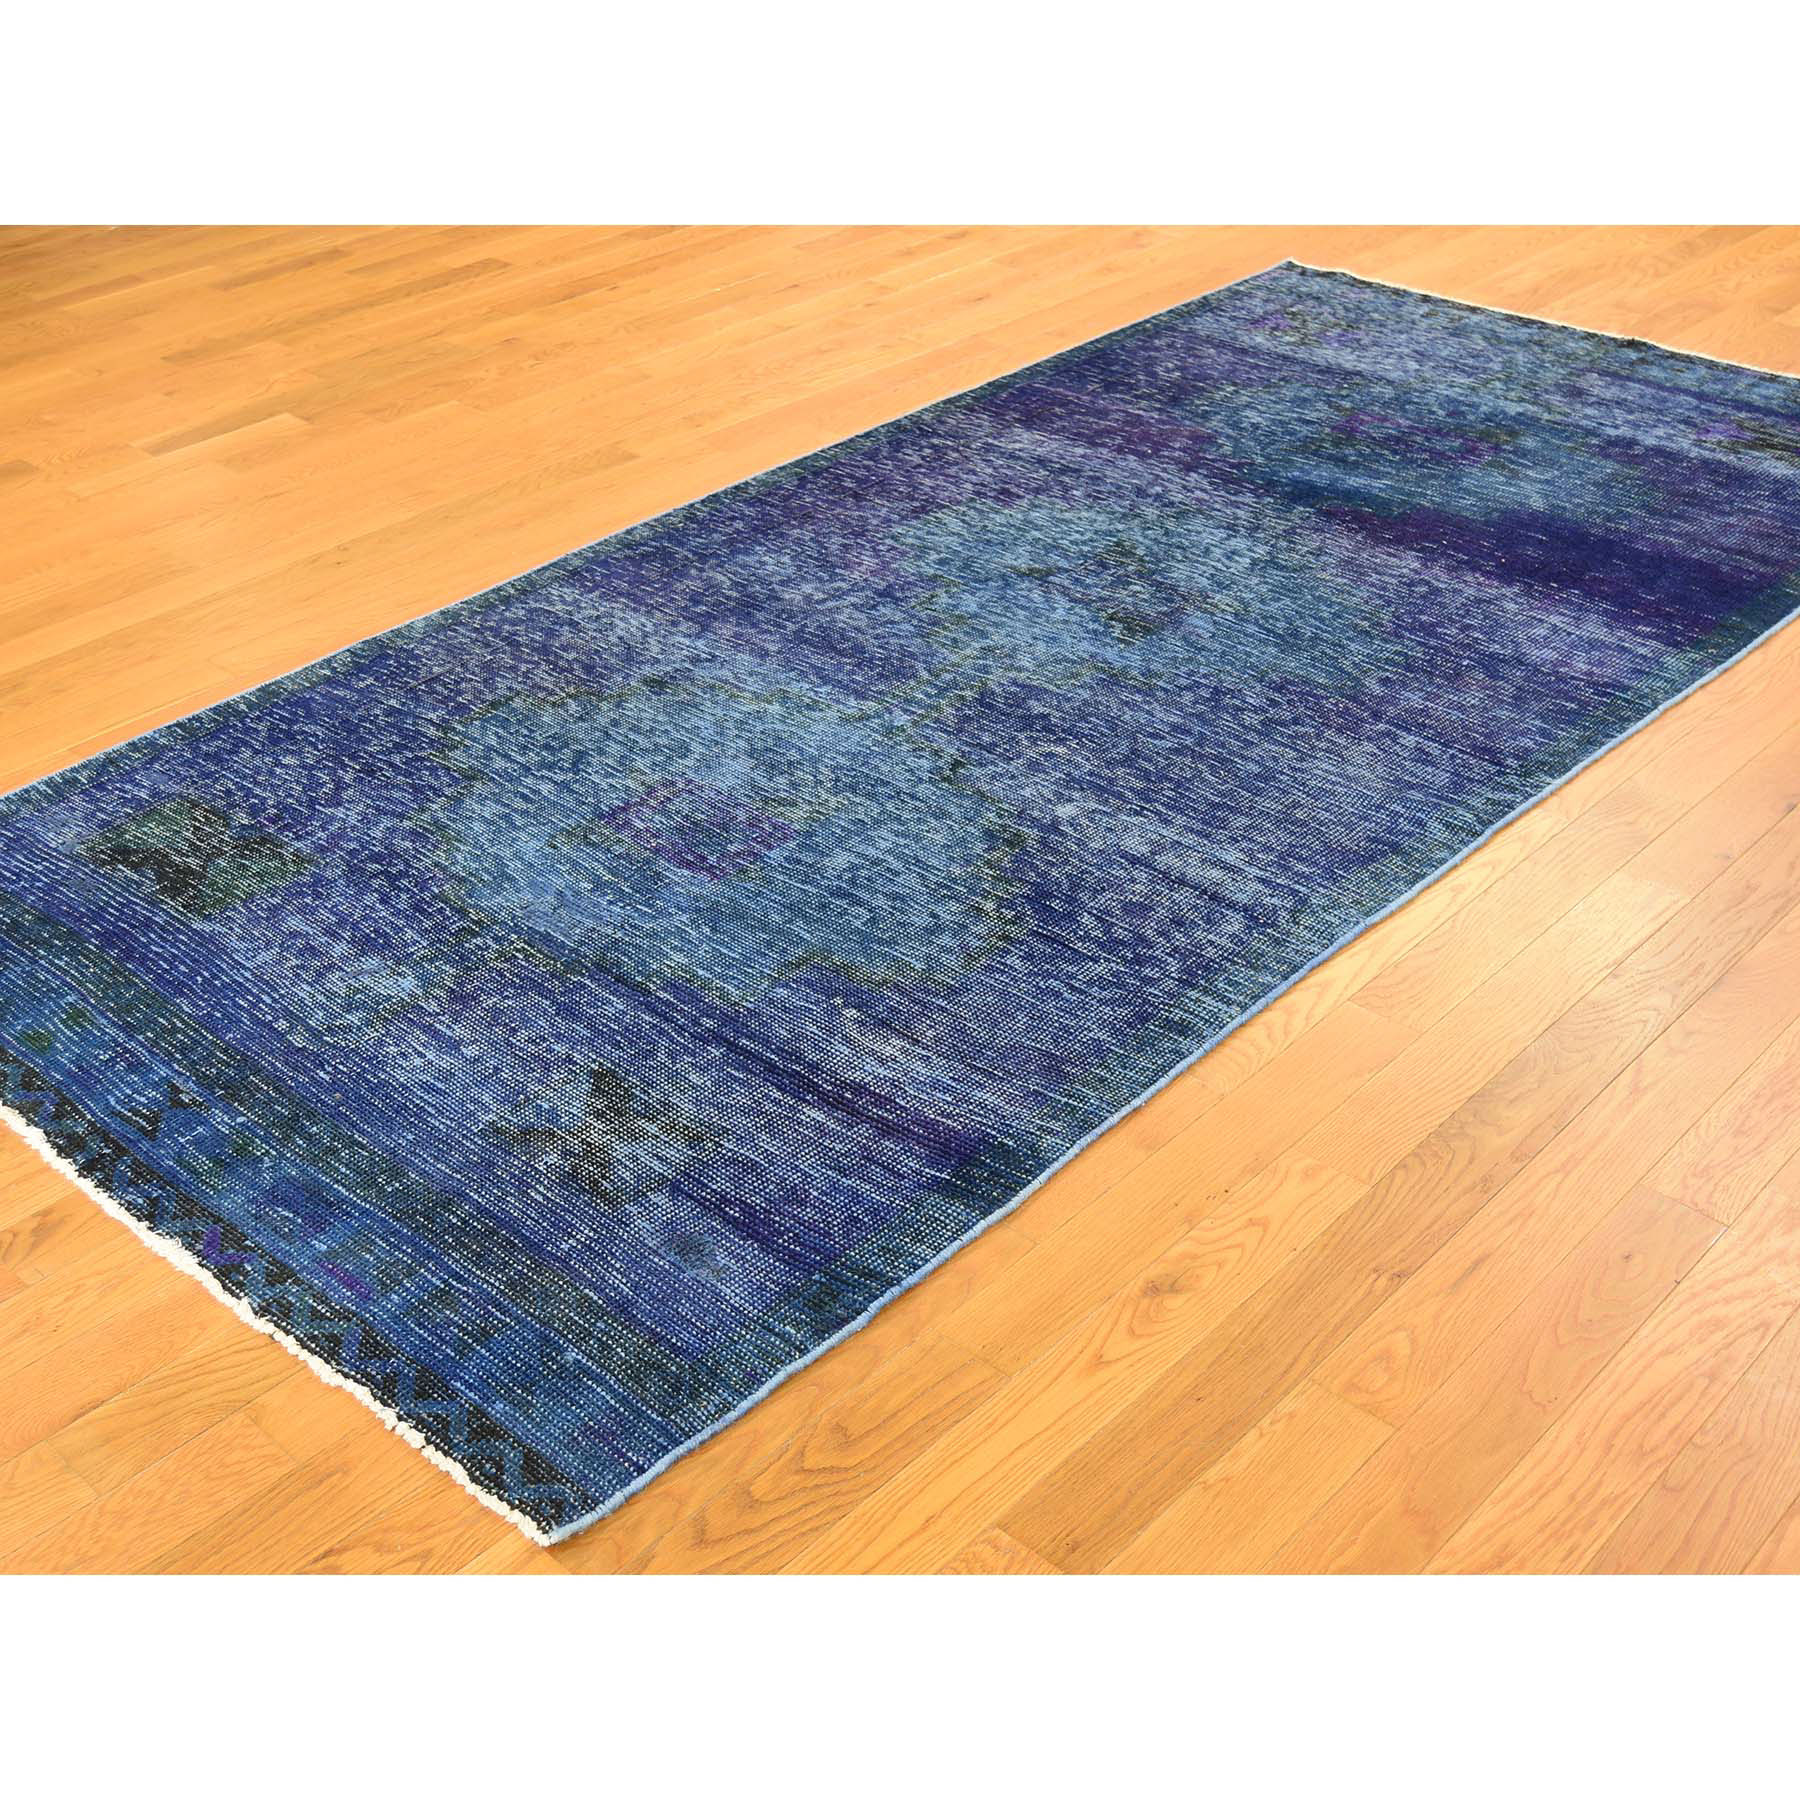 4-4--x9-4-- Overdyed Persian Tabriz Worn Hand-Knotted Wide Runner Rug 